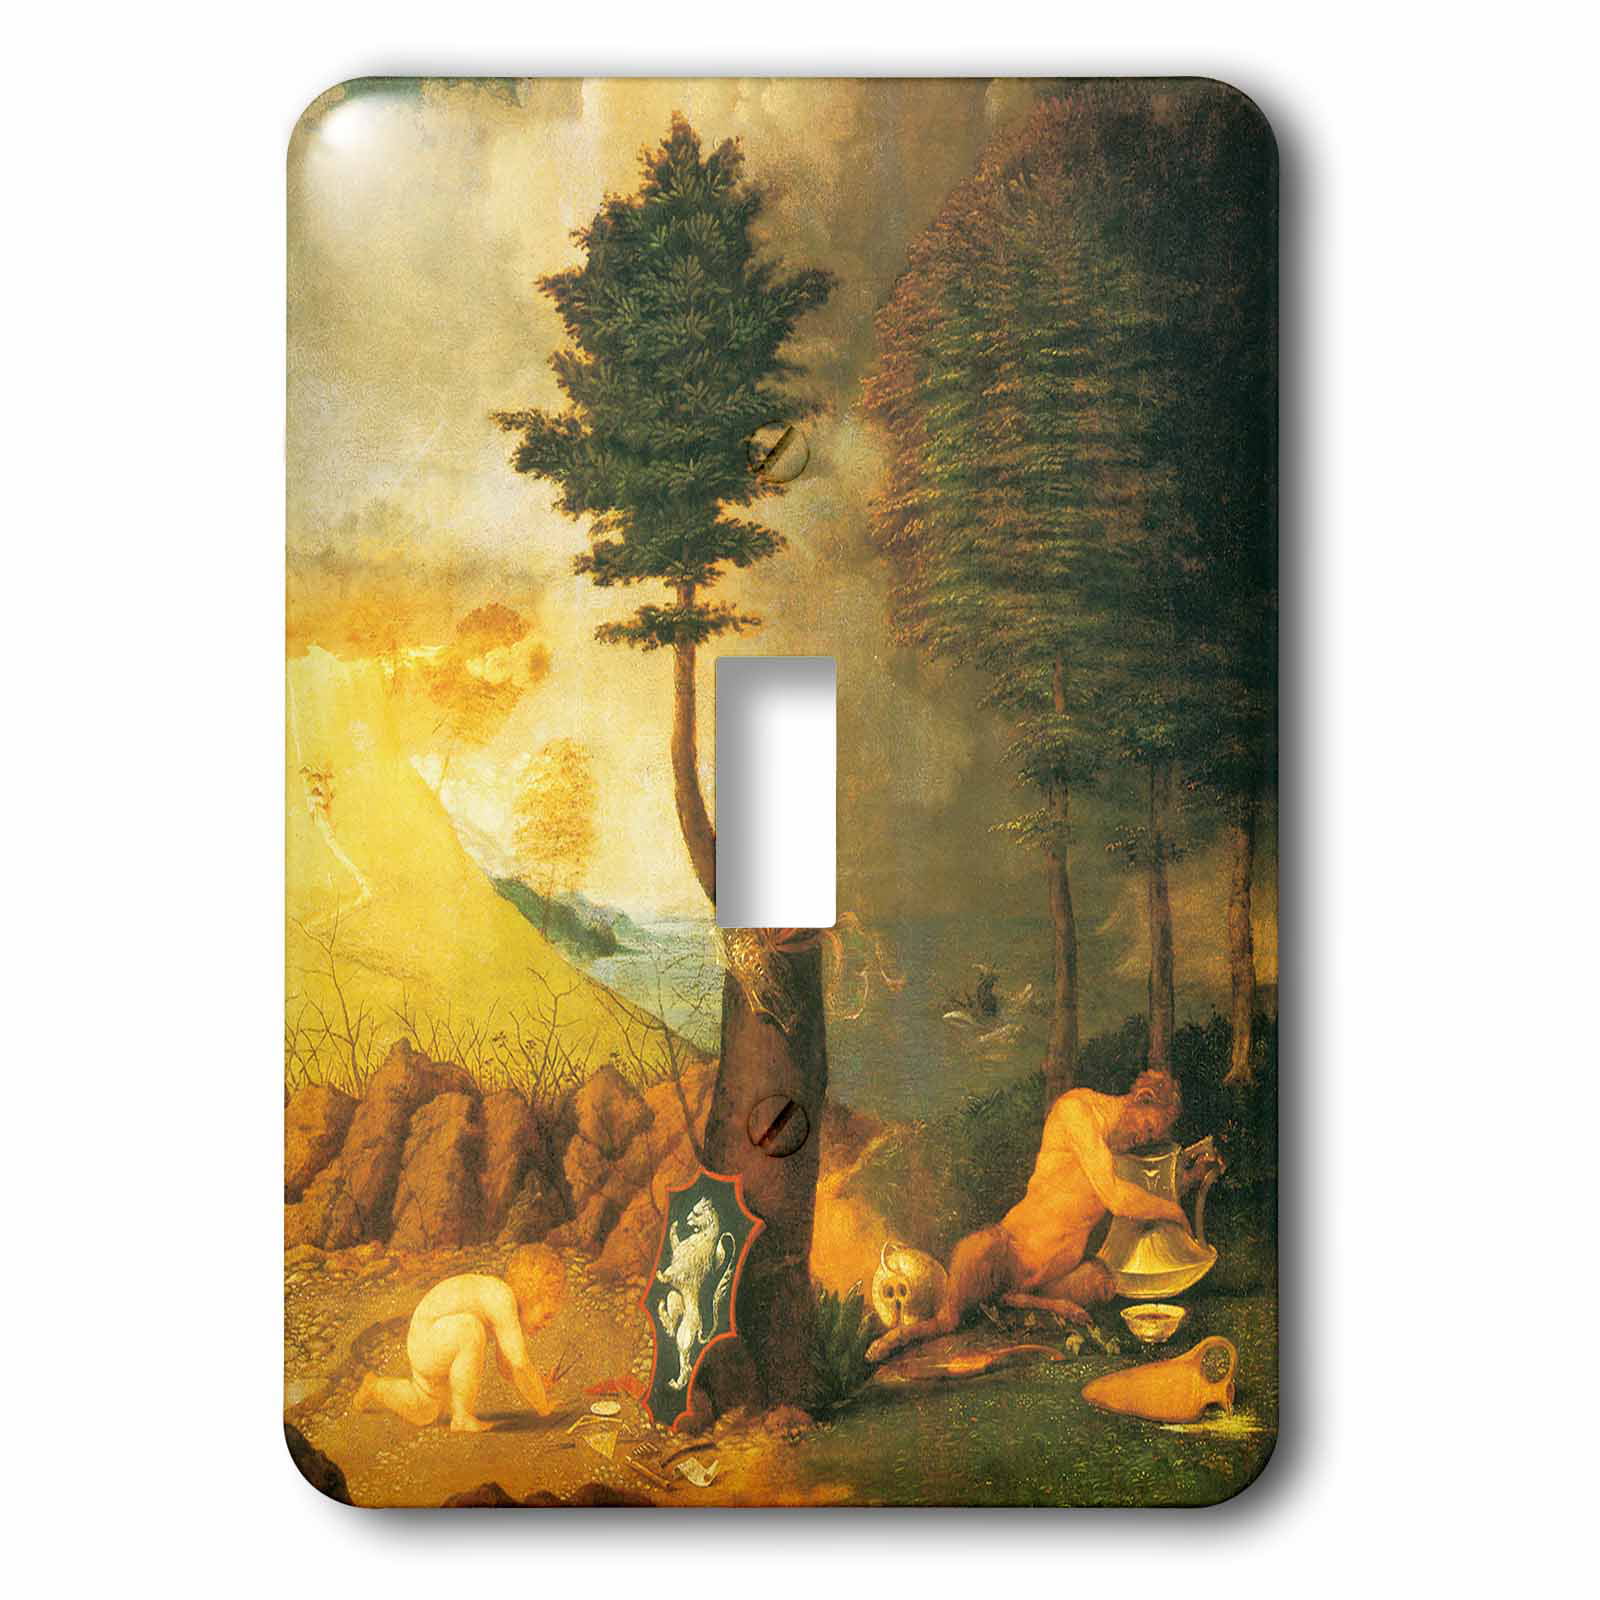 3dRose lsp_47911_1 Van Goghs Wheat Fields Painting Toggle Switch